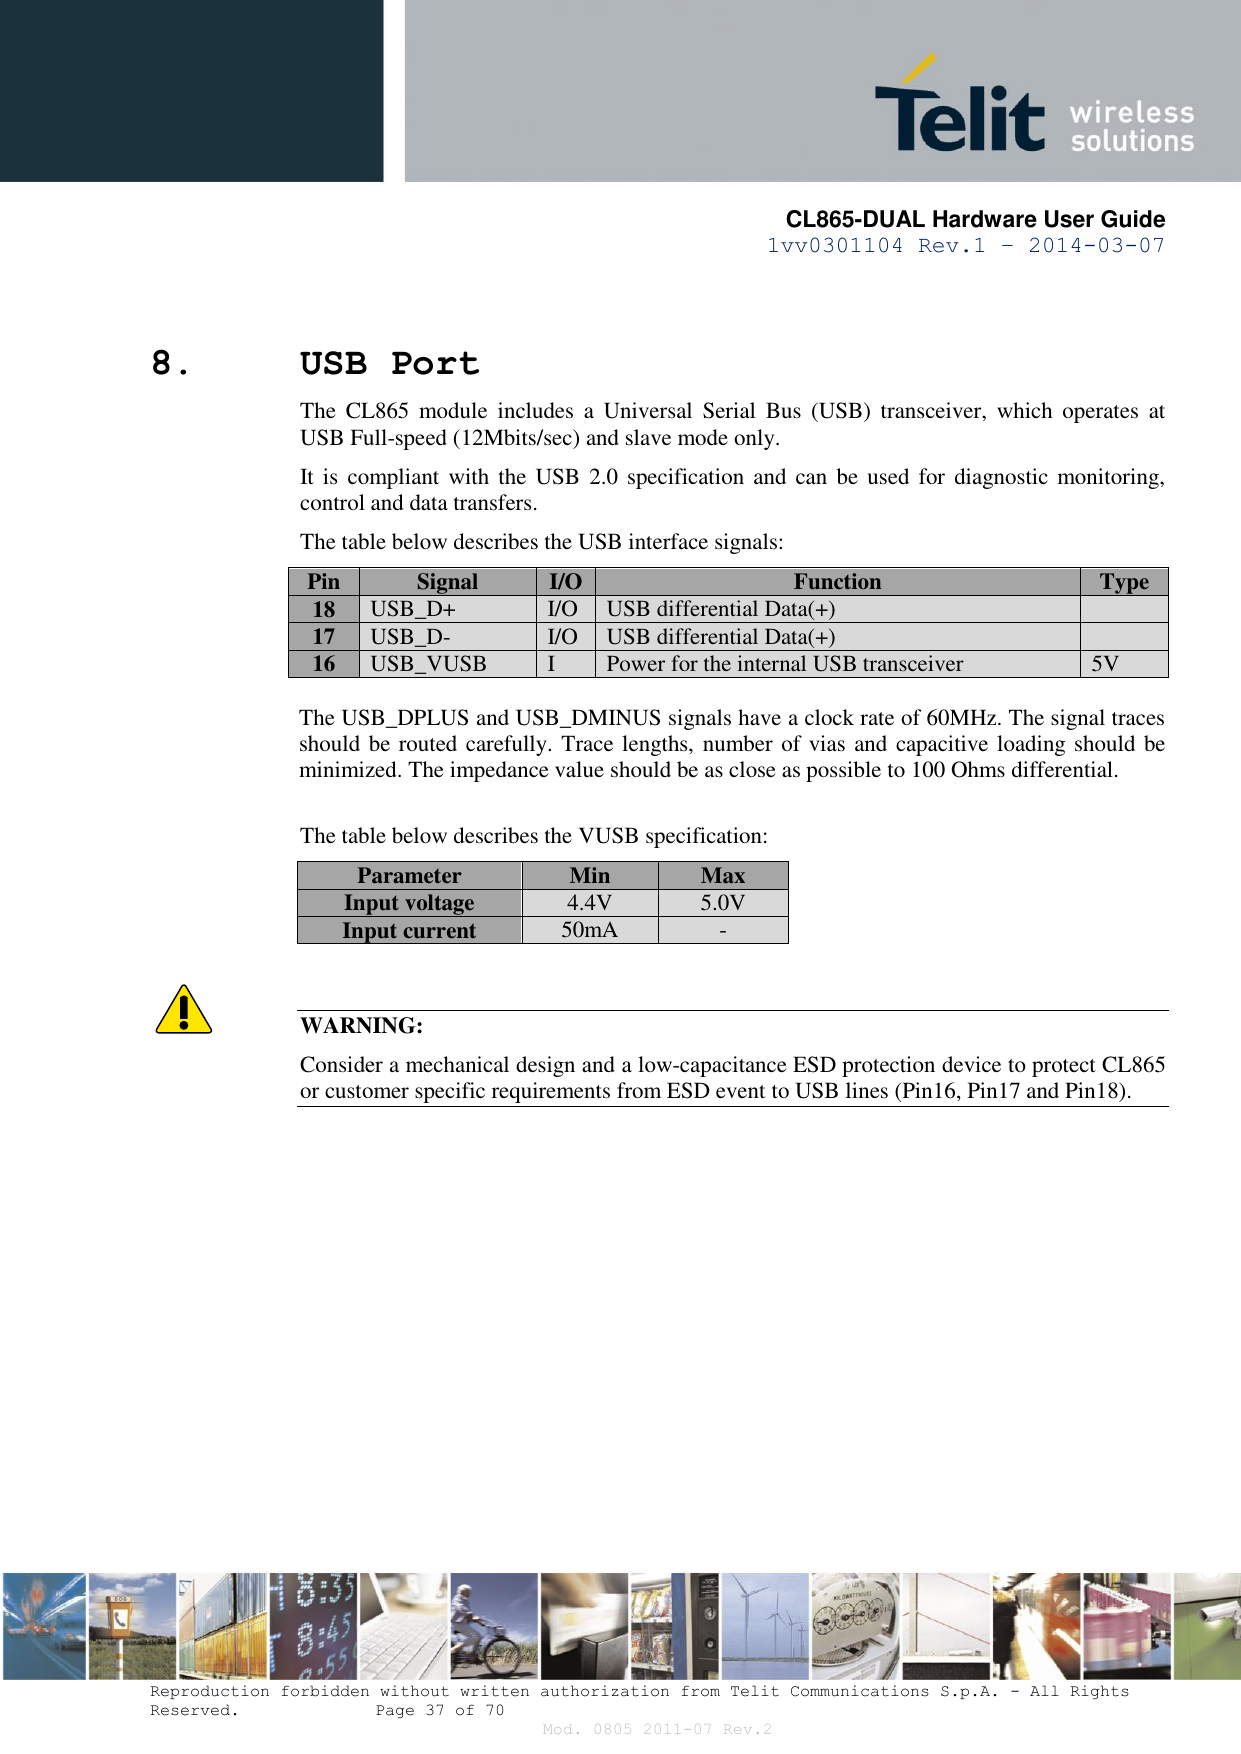       CL865-DUAL Hardware User Guide 1vv0301104 Rev.1 – 2014-03-07  Reproduction forbidden without written authorization from Telit Communications S.p.A. - All Rights Reserved.    Page 37 of 70 Mod. 0805 2011-07 Rev.2 8. USB Port The  CL865  module  includes  a  Universal  Serial  Bus  (USB)  transceiver,  which  operates  at USB Full-speed (12Mbits/sec) and slave mode only.  It is  compliant with the  USB  2.0  specification and  can  be used  for diagnostic monitoring, control and data transfers. The table below describes the USB interface signals: Pin Signal I/O Function Type 18 USB_D+ I/O USB differential Data(+)  17 USB_D- I/O USB differential Data(+)  16 USB_VUSB I Power for the internal USB transceiver 5V  The USB_DPLUS and USB_DMINUS signals have a clock rate of 60MHz. The signal traces should be routed carefully. Trace lengths, number of vias and capacitive loading should be minimized. The impedance value should be as close as possible to 100 Ohms differential.  The table below describes the VUSB specification: Parameter Min Max Input voltage 4.4V 5.0V Input current 50mA -   WARNING: Consider a mechanical design and a low-capacitance ESD protection device to protect CL865 or customer specific requirements from ESD event to USB lines (Pin16, Pin17 and Pin18).            